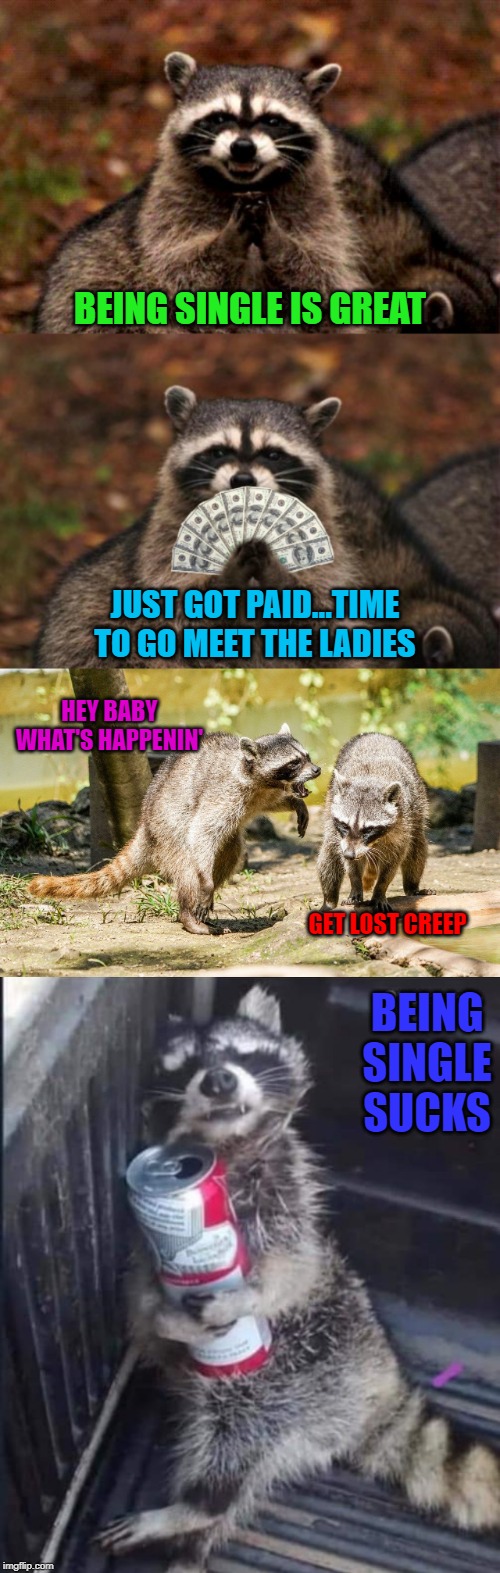 The lighter side of dating... | BEING SINGLE IS GREAT; JUST GOT PAID...TIME TO GO MEET THE LADIES; HEY BABY WHAT'S HAPPENIN'; GET LOST CREEP; BEING SINGLE SUCKS | image tagged in memes,evil plotting raccoon,being single,funny,lighter side of dating,raccoon with cash | made w/ Imgflip meme maker